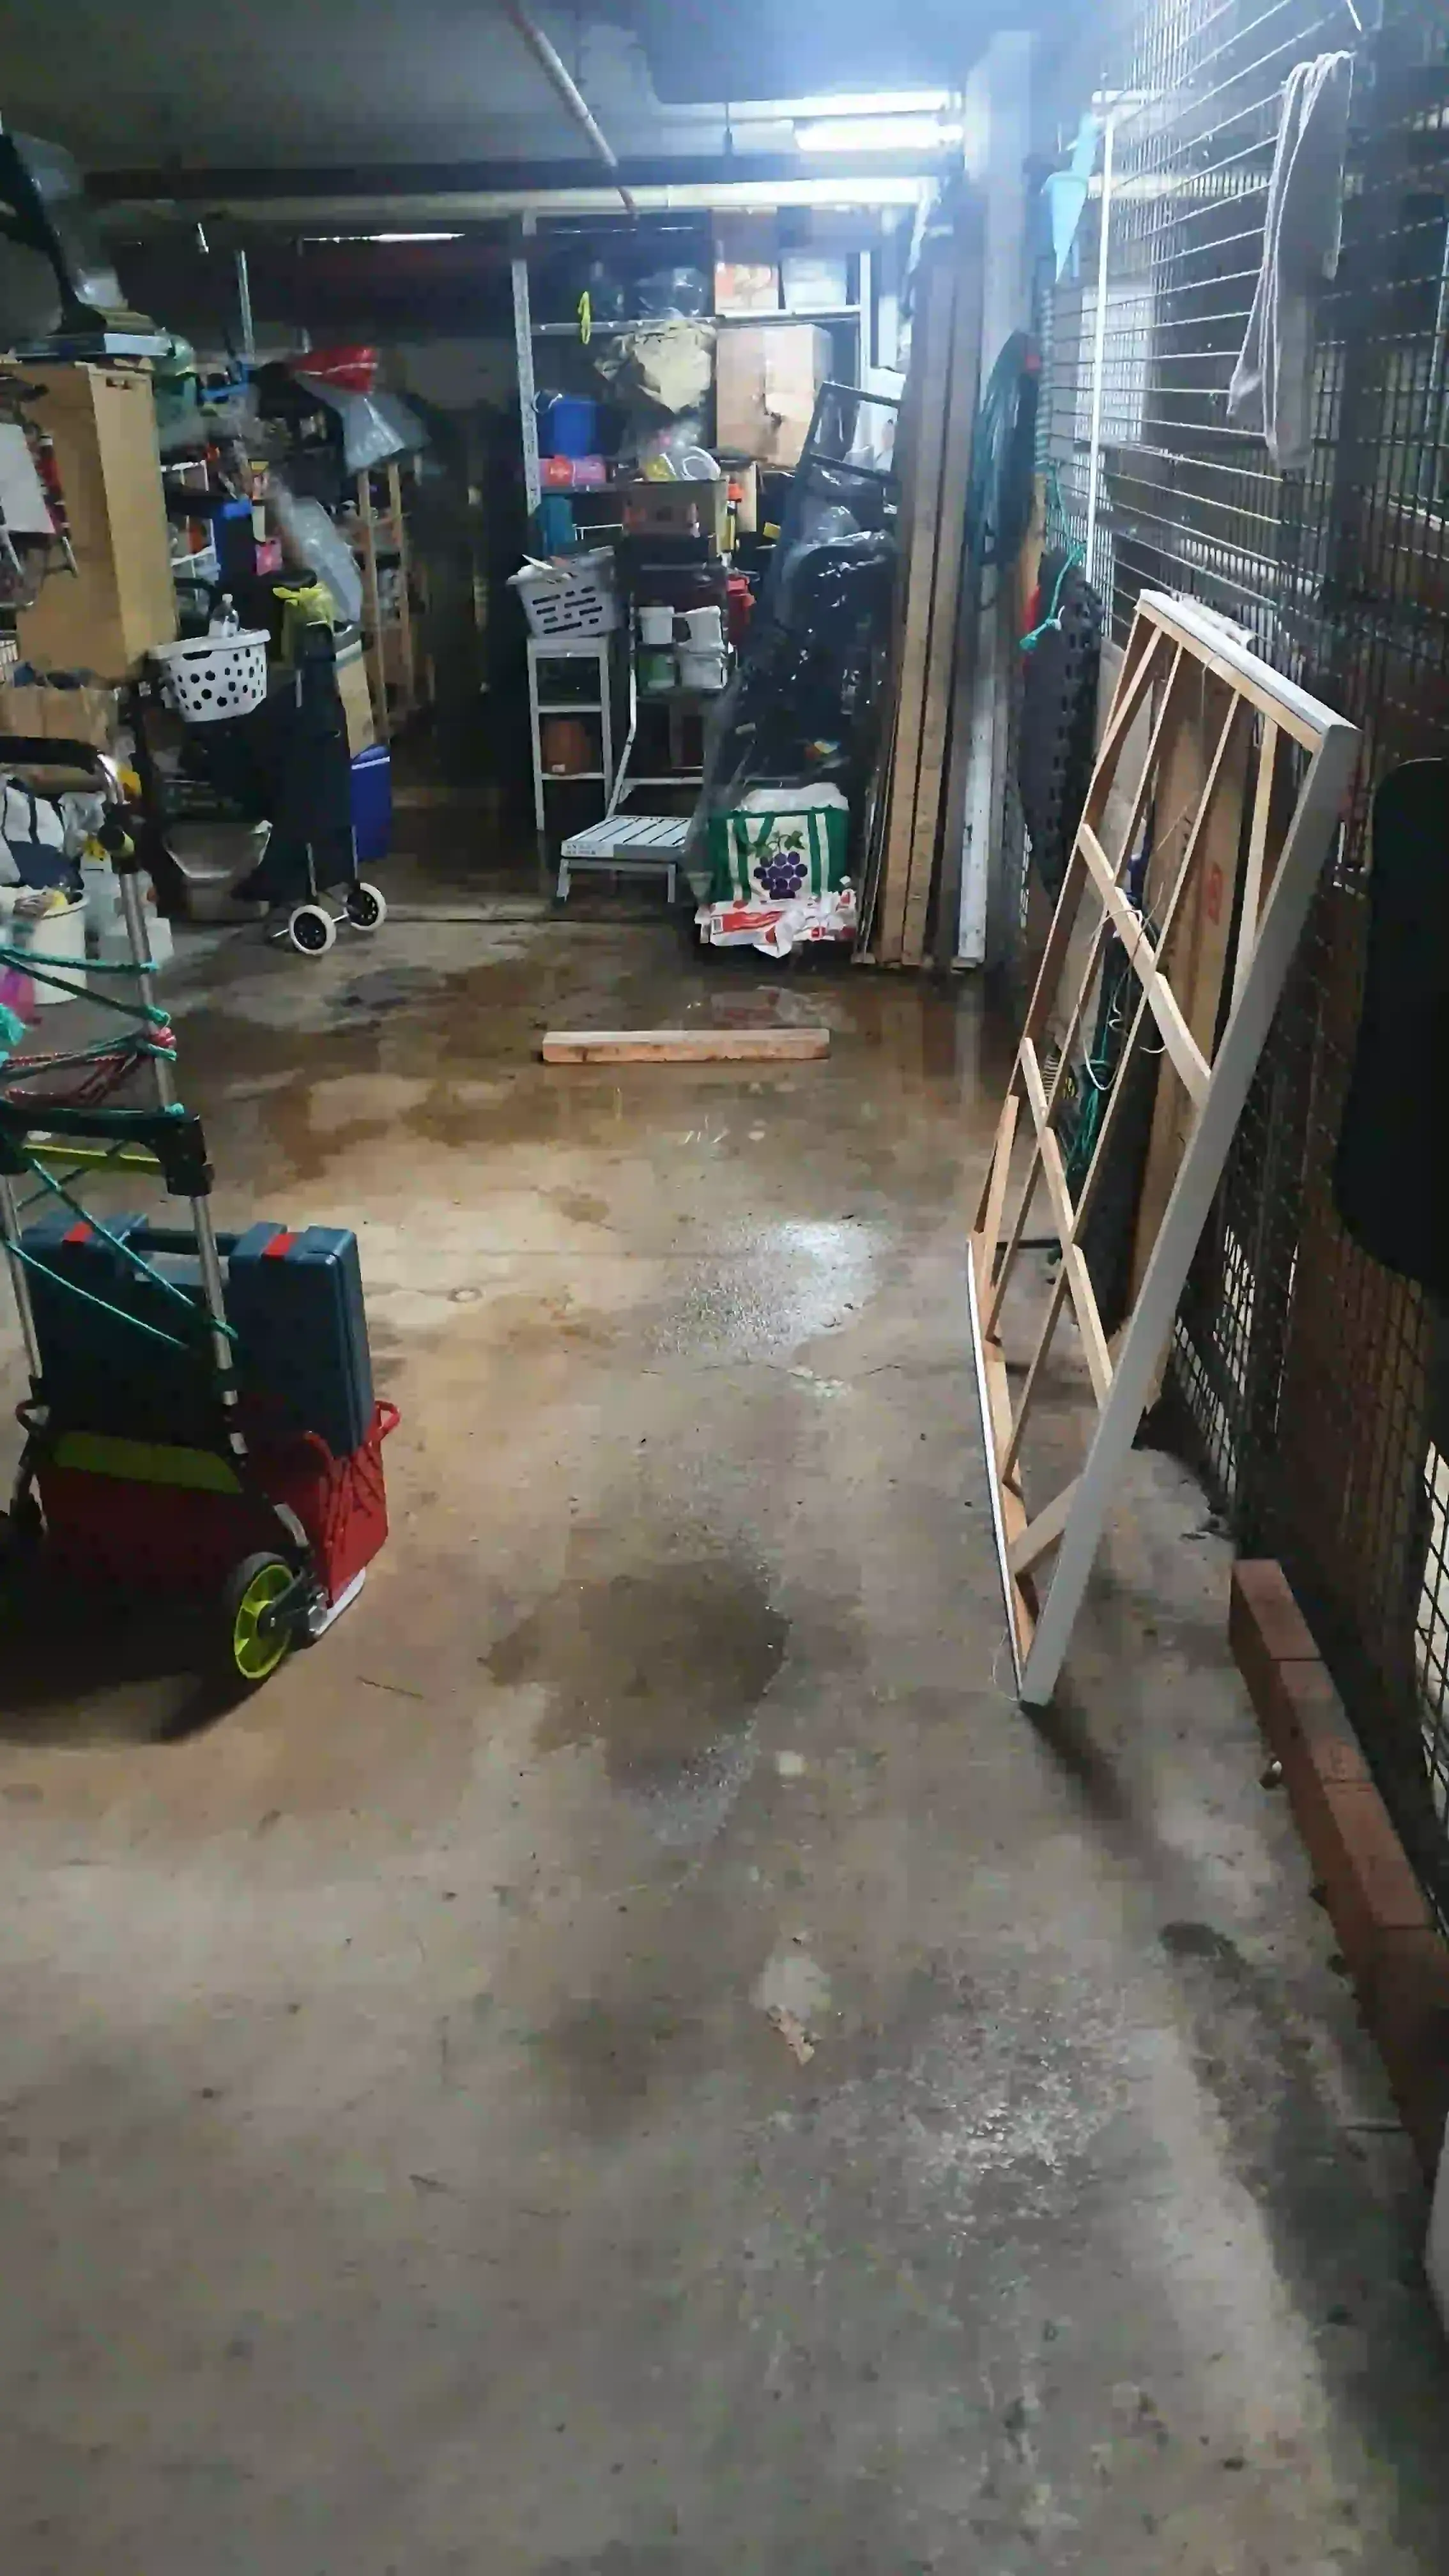 SP52948-examples-of-serious-damages-due-to-water-leakages-in-Lot-186-garage-photo-1-1Mar2022.webp